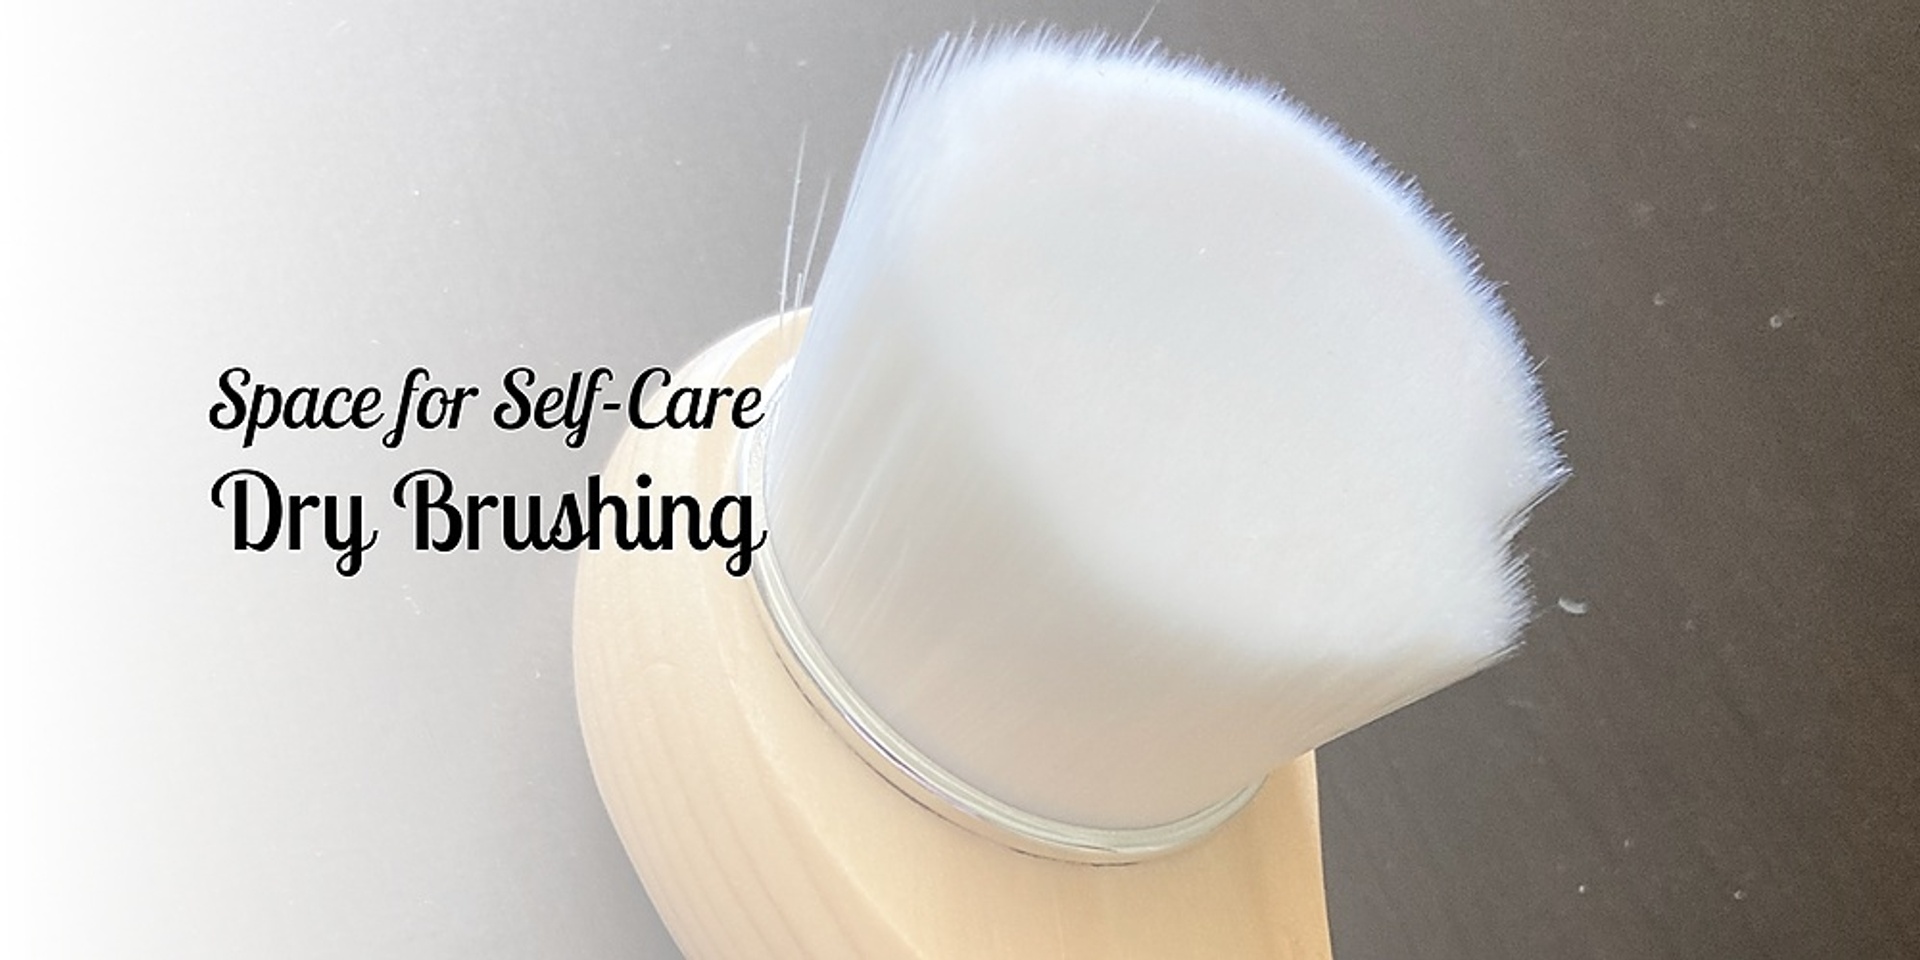 Space for Self-Care: Dry Brushing